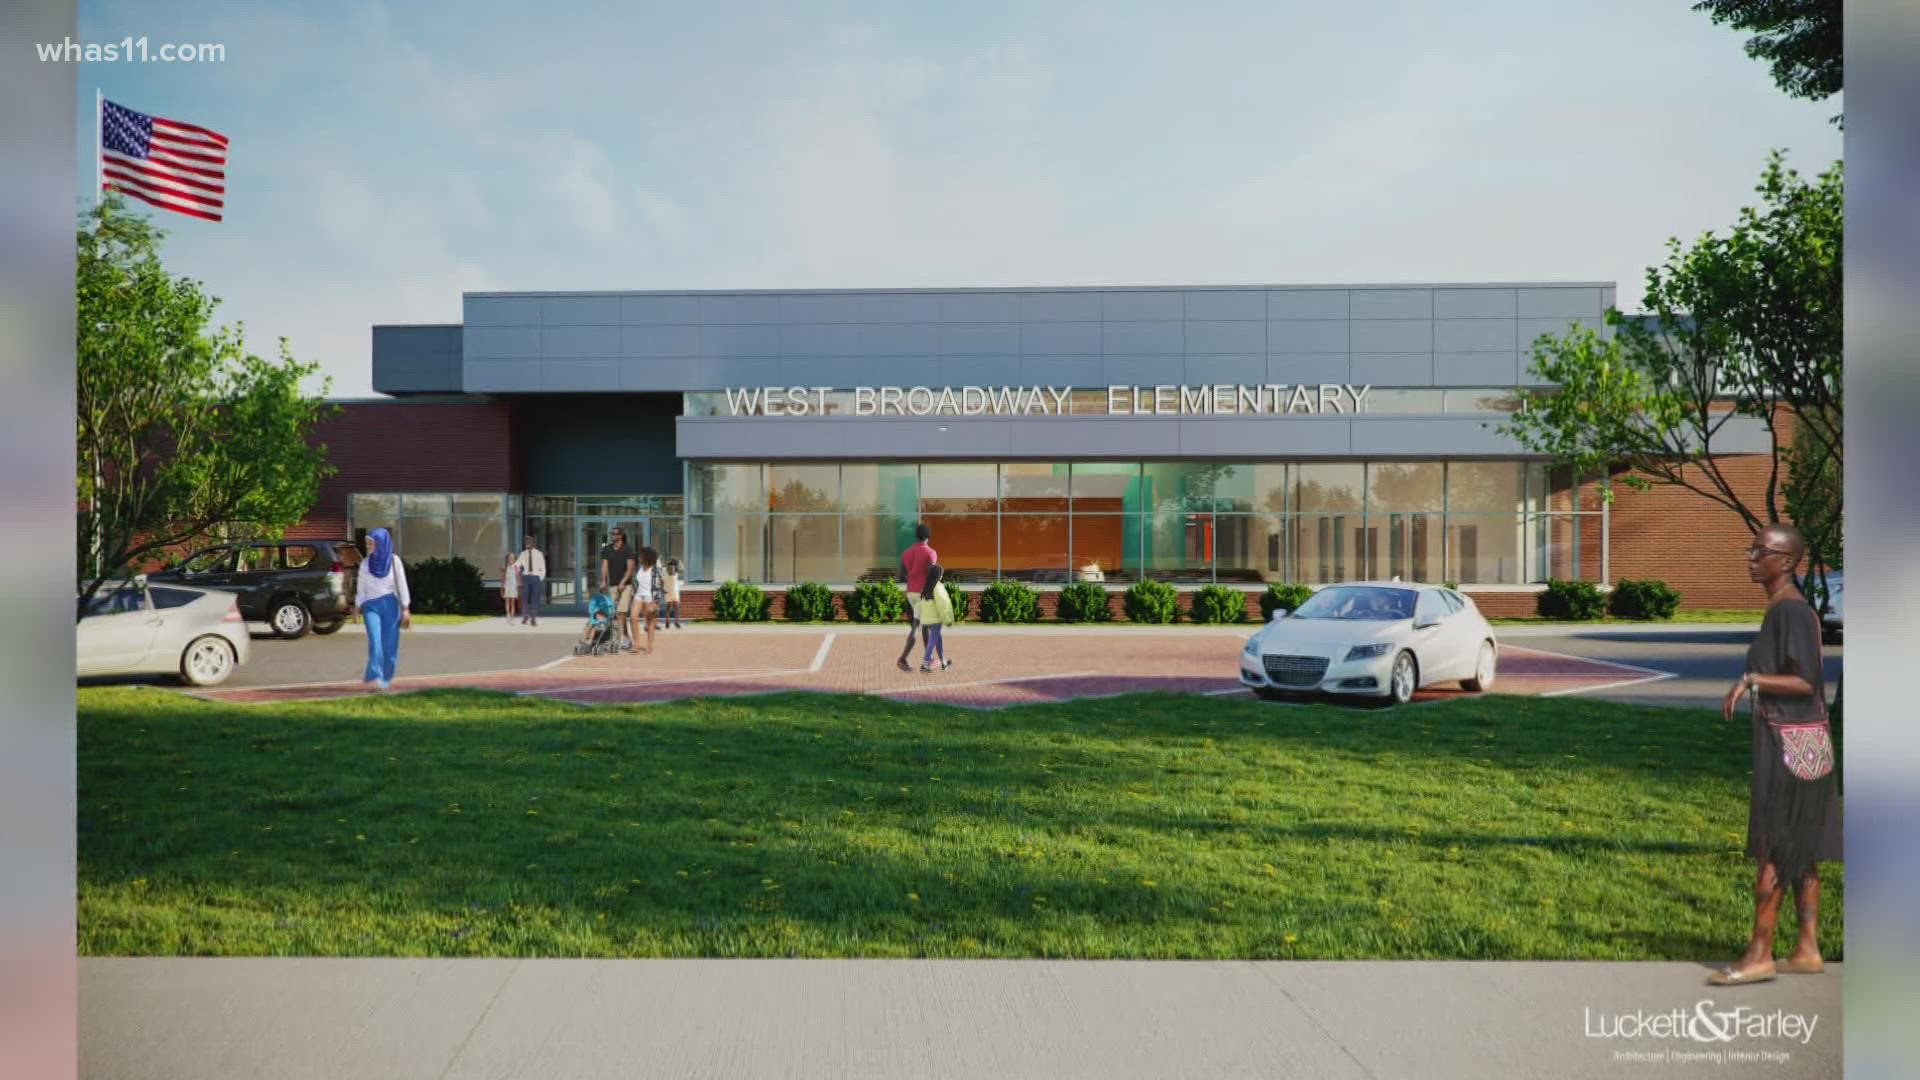 JCPS excited for groundbreaking of new $19M elementary school | whas11.com